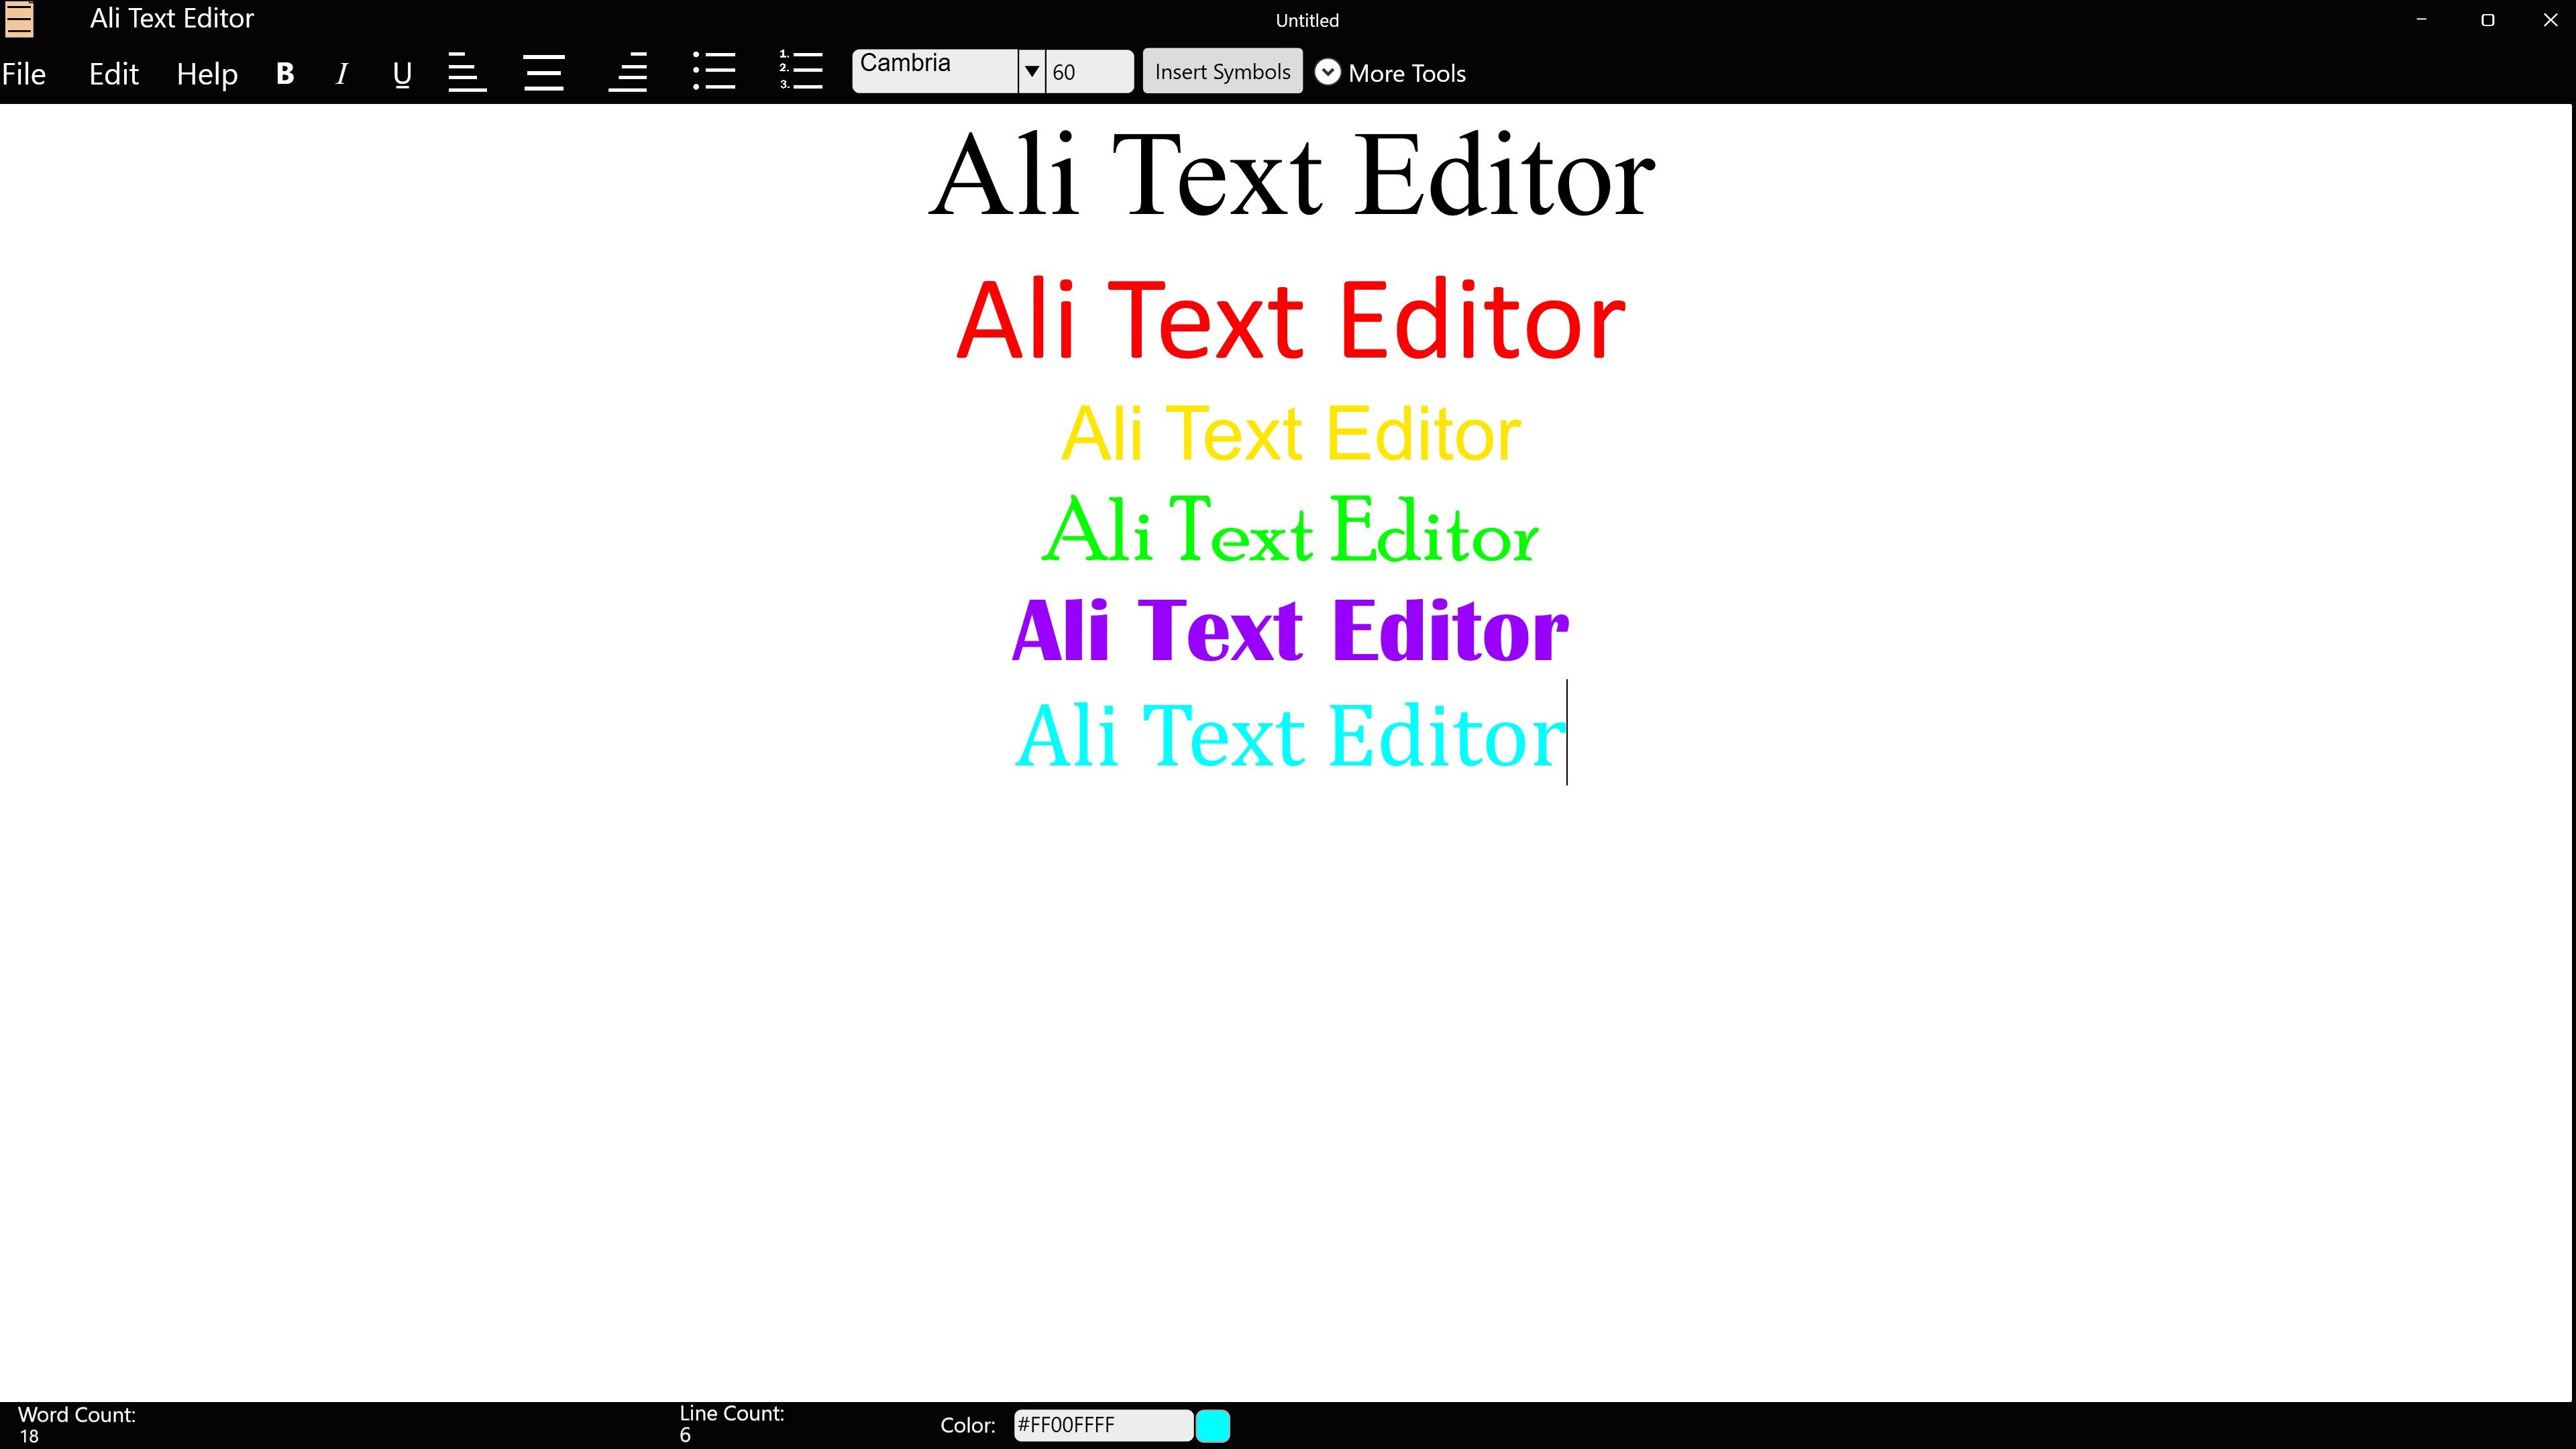 Ali Text Editor is a word processor that can be used for creating written documents. Features include text alignment, printing and a backup system. Documents can be saved in the .ali or .txt format. The .ali format supports multicolored text, different fonts, pictures and several other features.